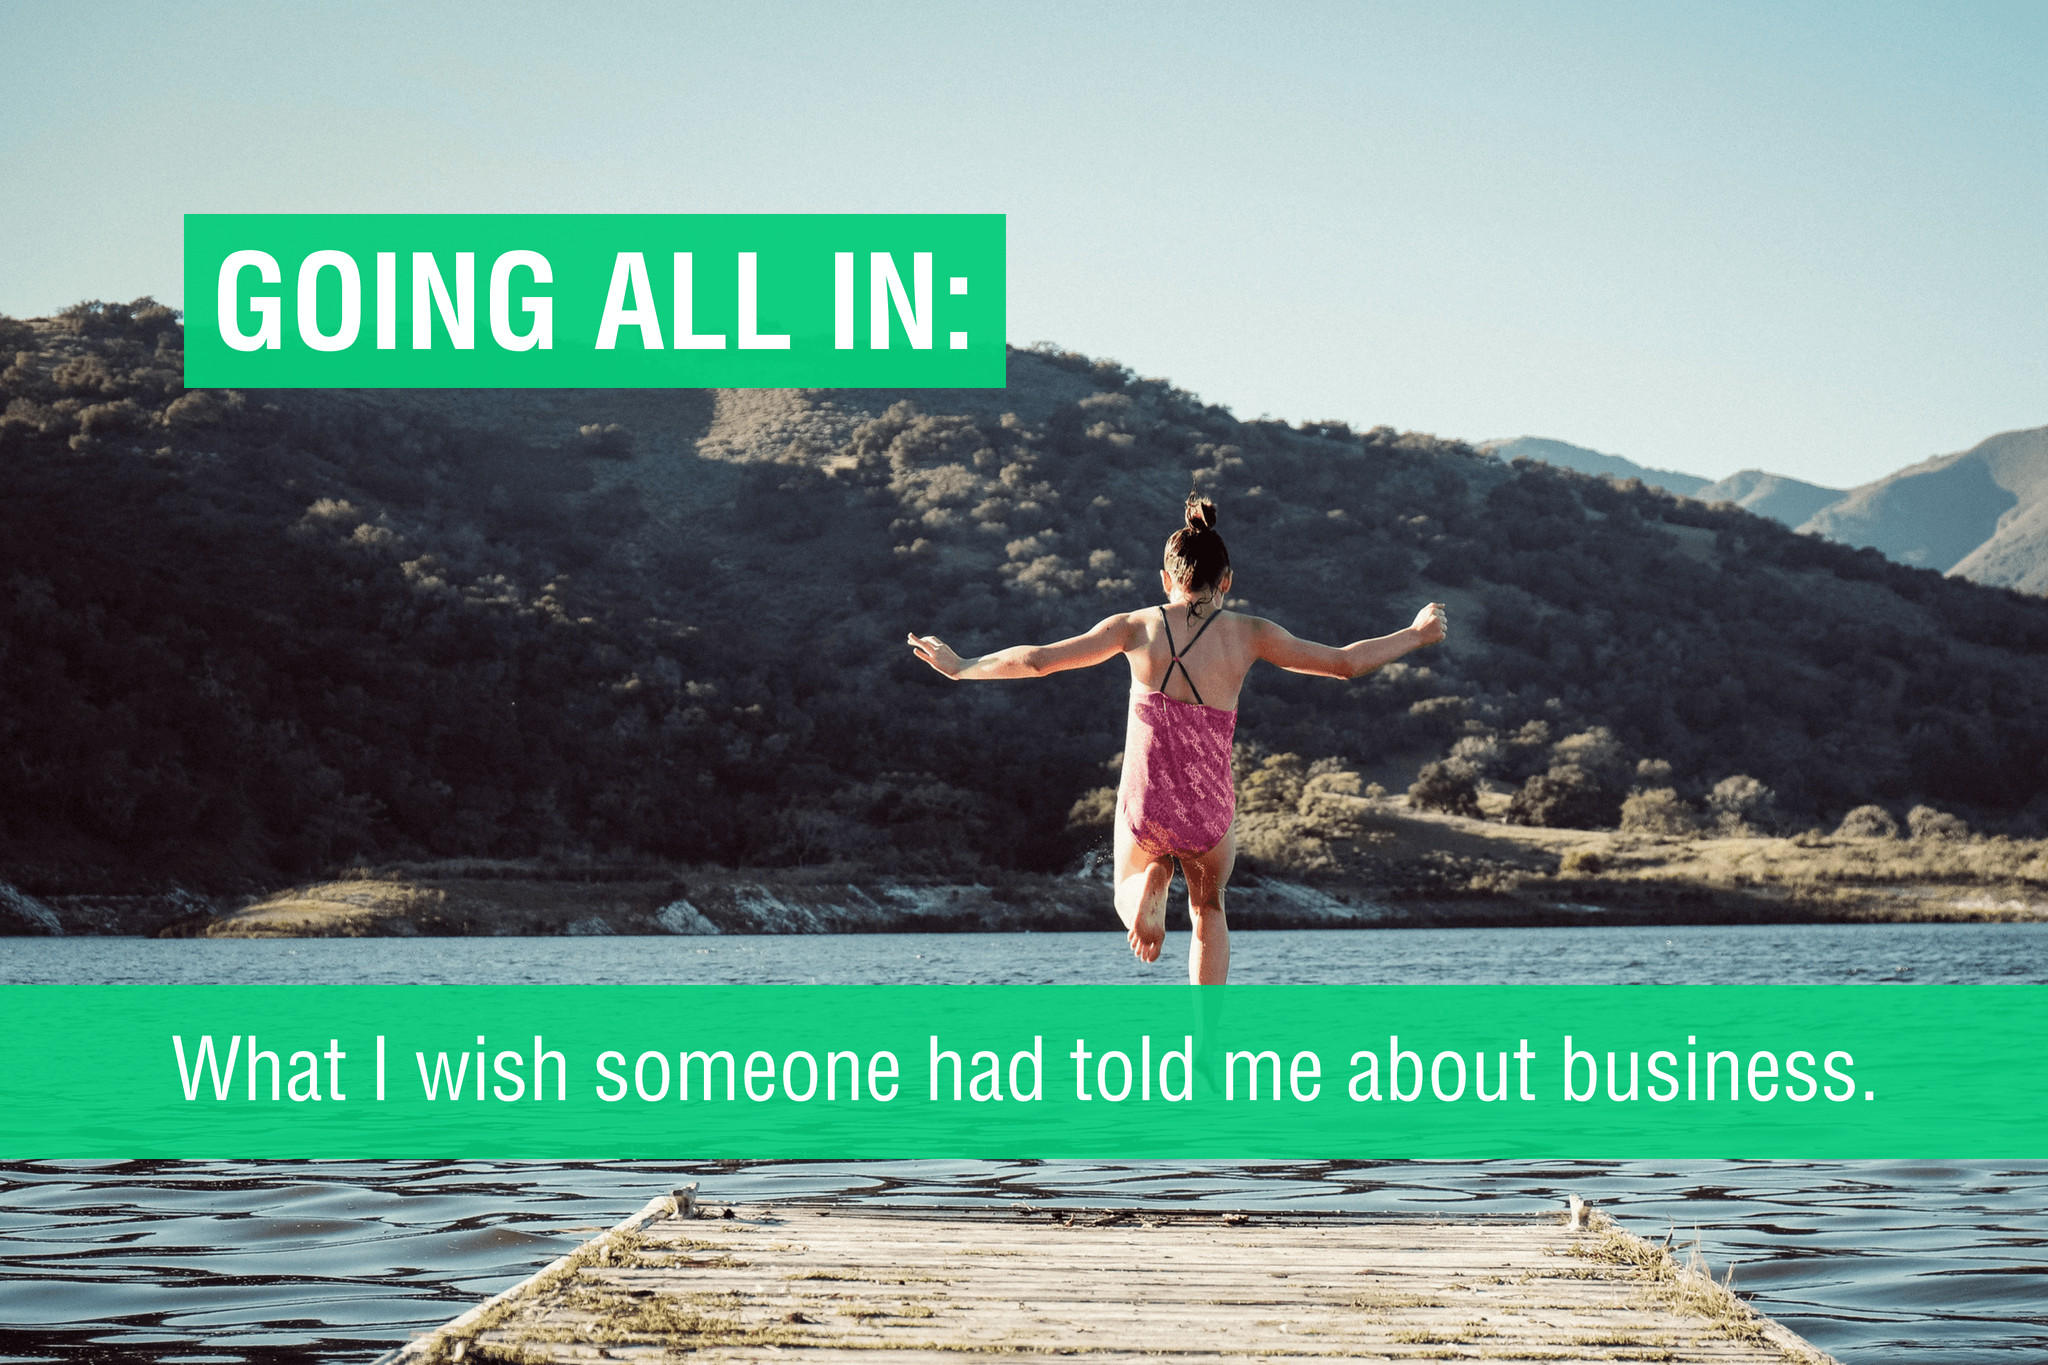 Going All In: What I wish someone had told me about business